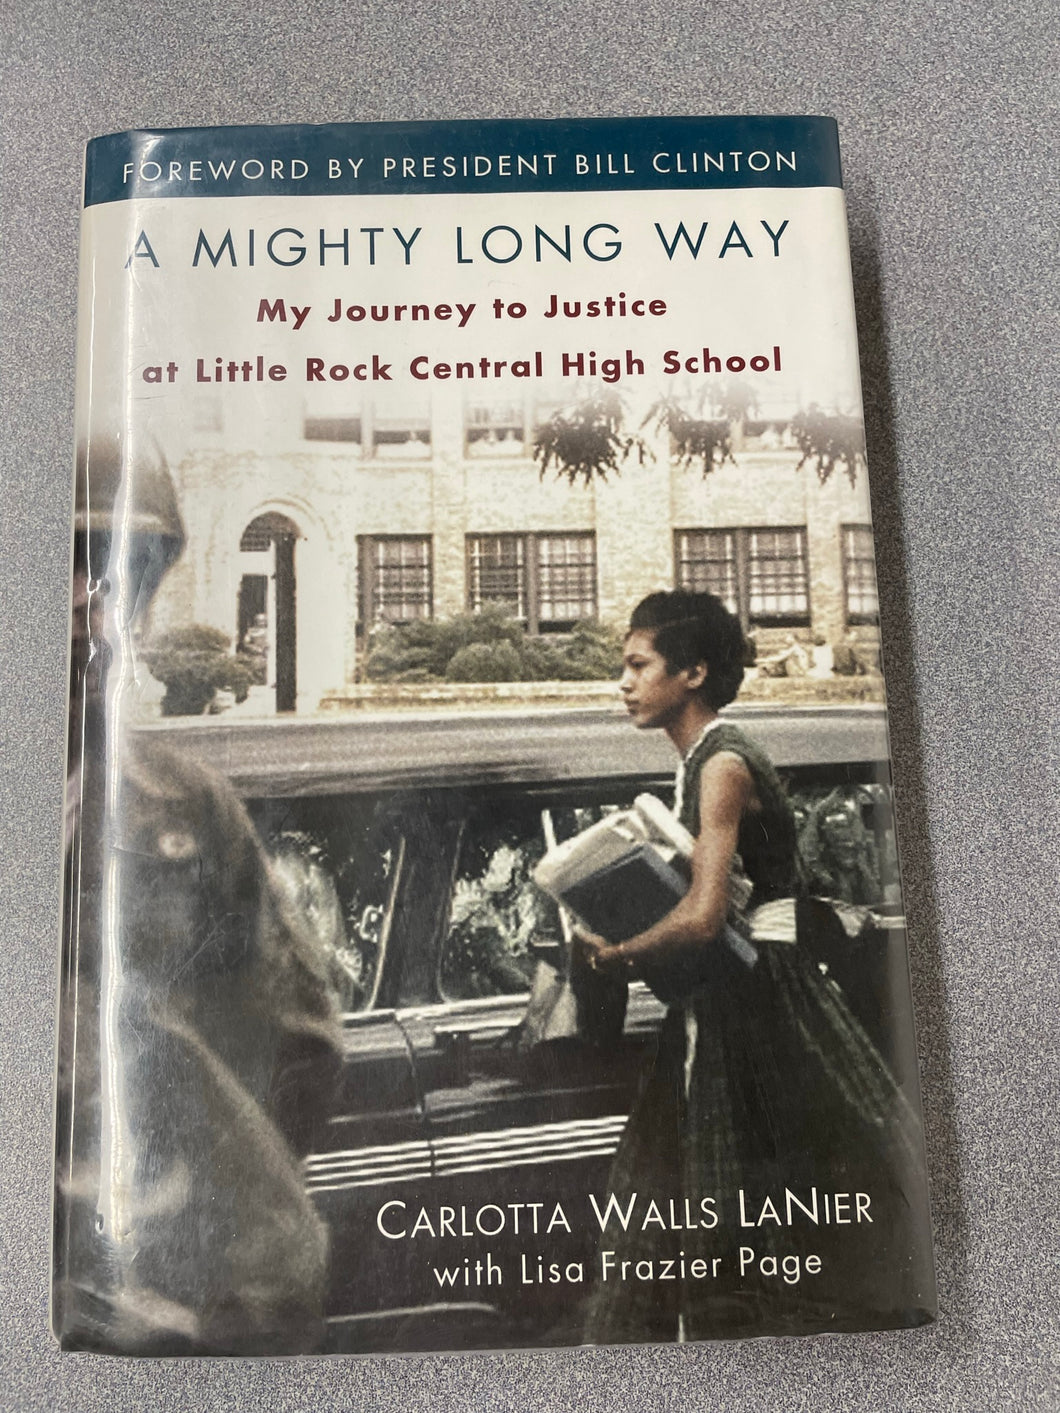 A Might Long Way: My Journey to Justice at Little Rock Central High School, Lanier, Carlotta Walls [2009] BH 10/22